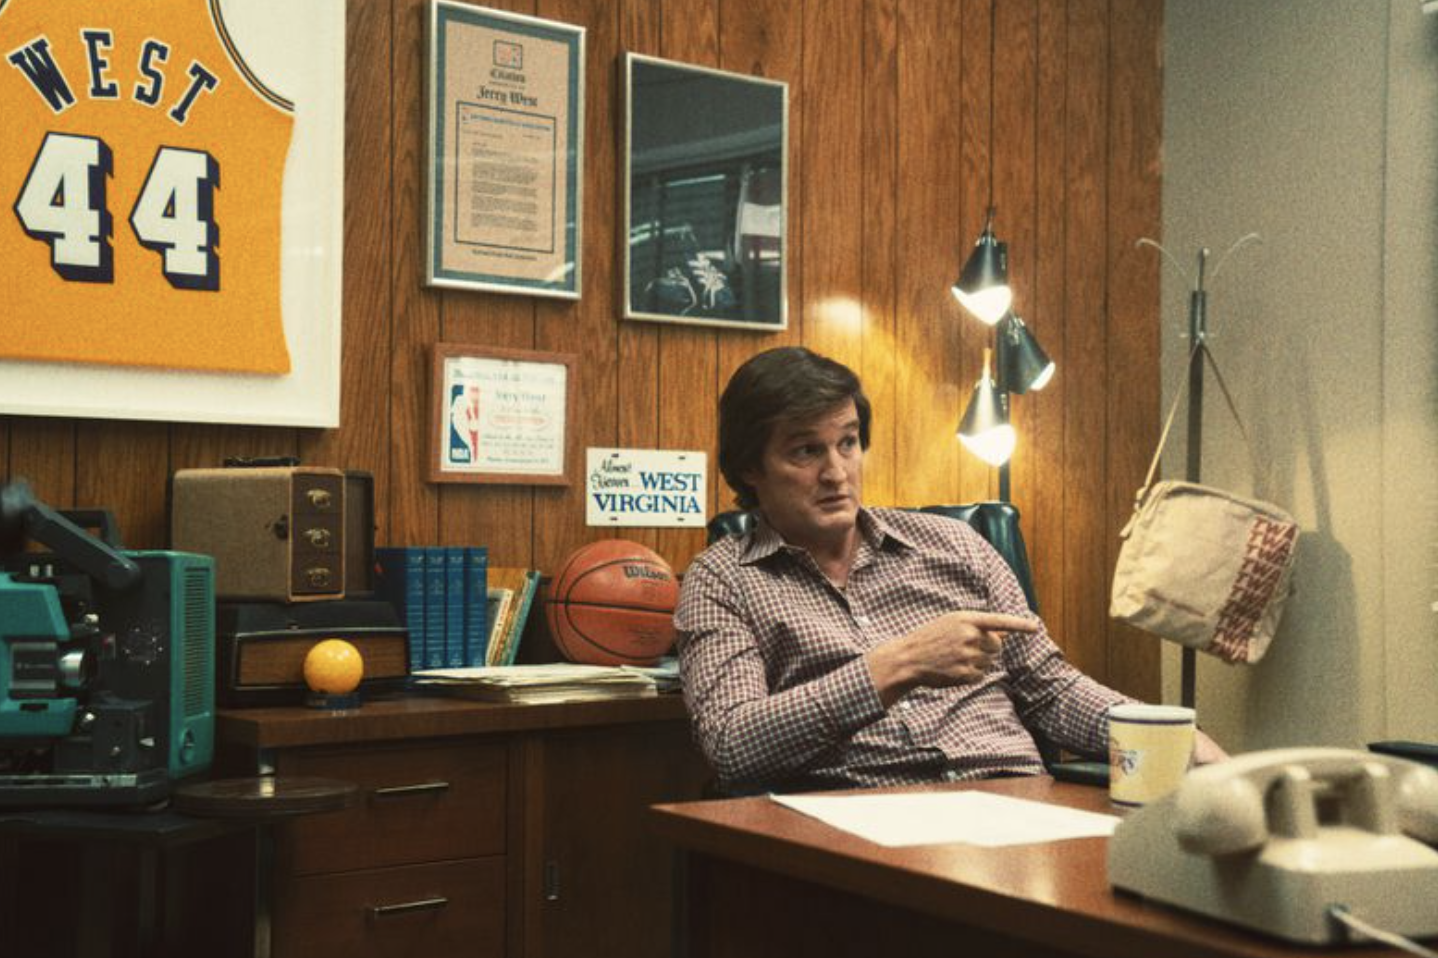 Jerry West as portrayed by the actor Jason Clarke in HBO's Winning Time.